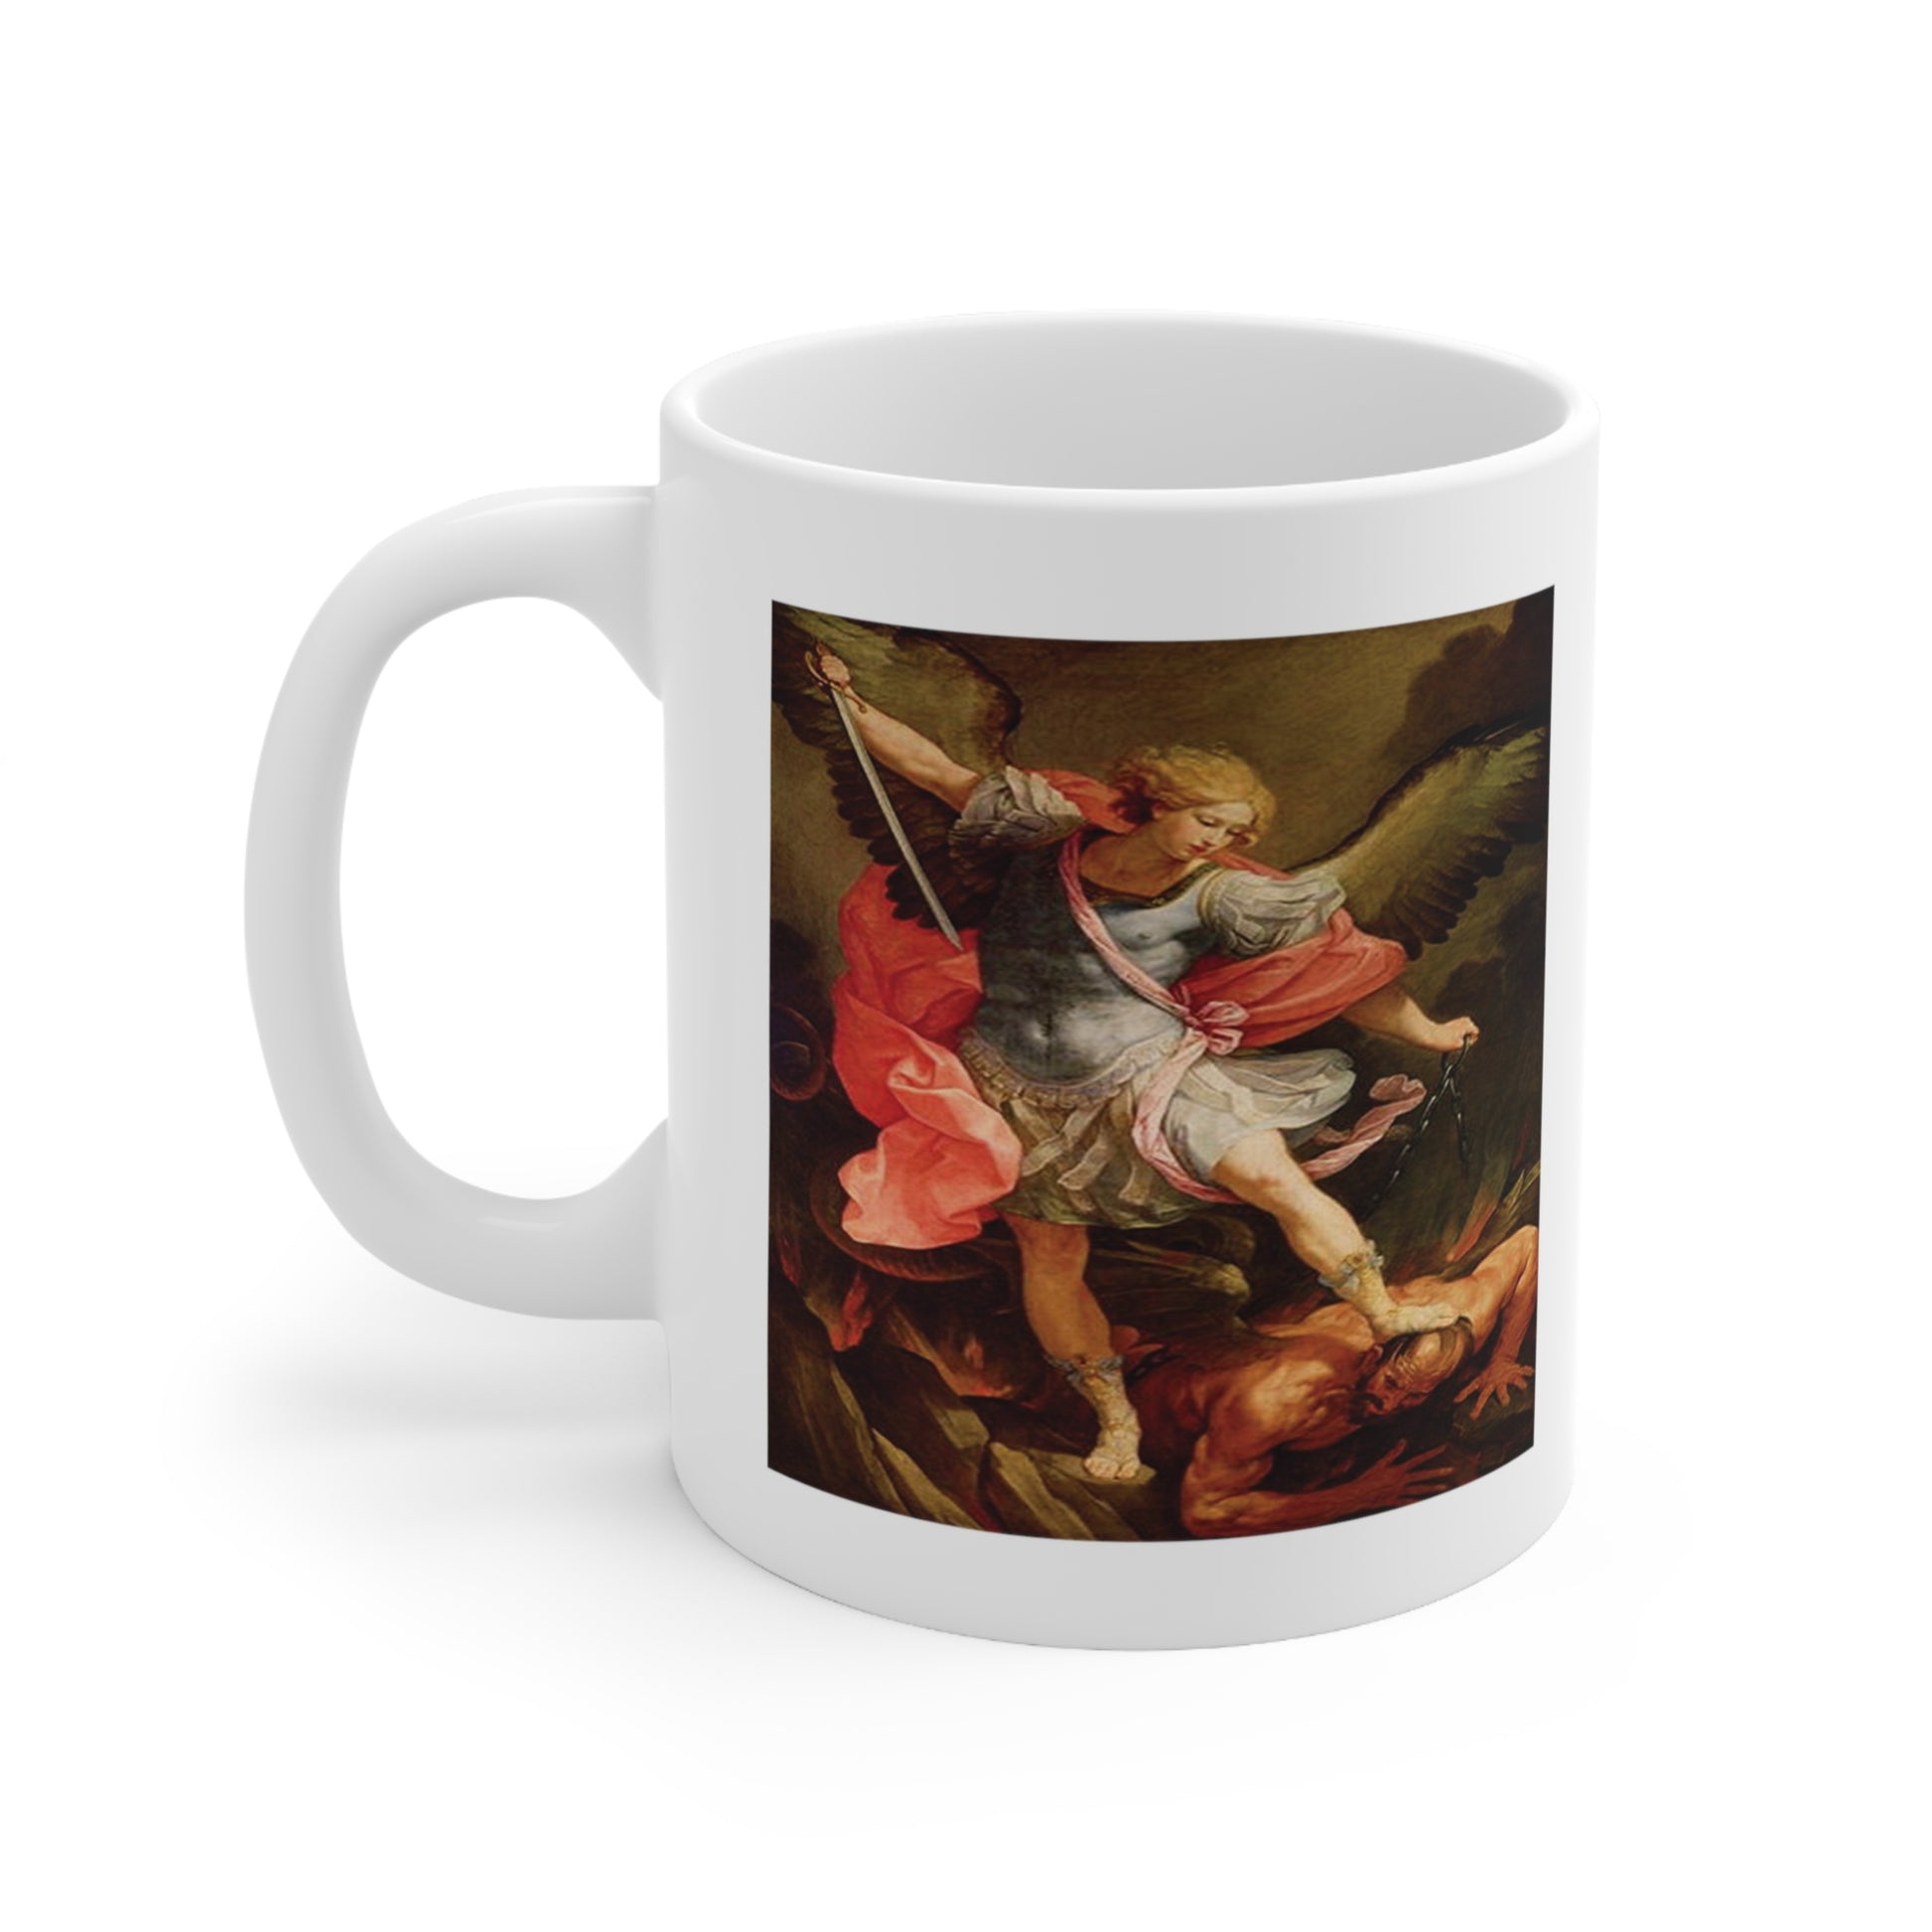 A white ceramic coffee mug with a design of Archangel Michael defeating Satan.